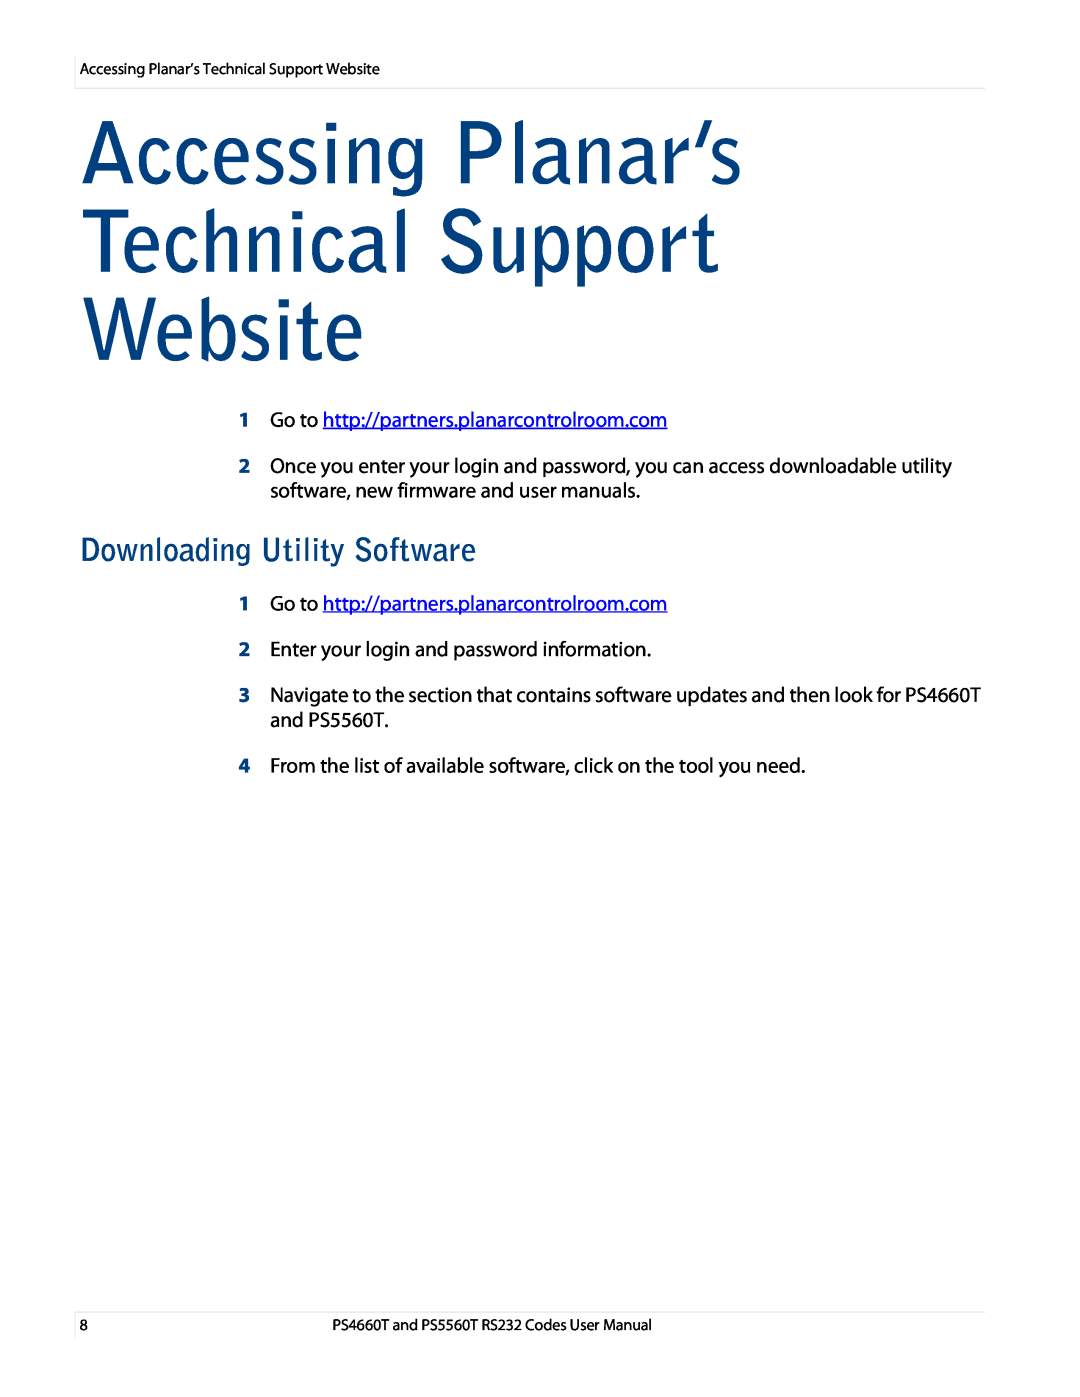 Planar RS232, PS4660T, PS5660T manual Accessing Planar’s Technical Support Website, Downloading Utility Software 